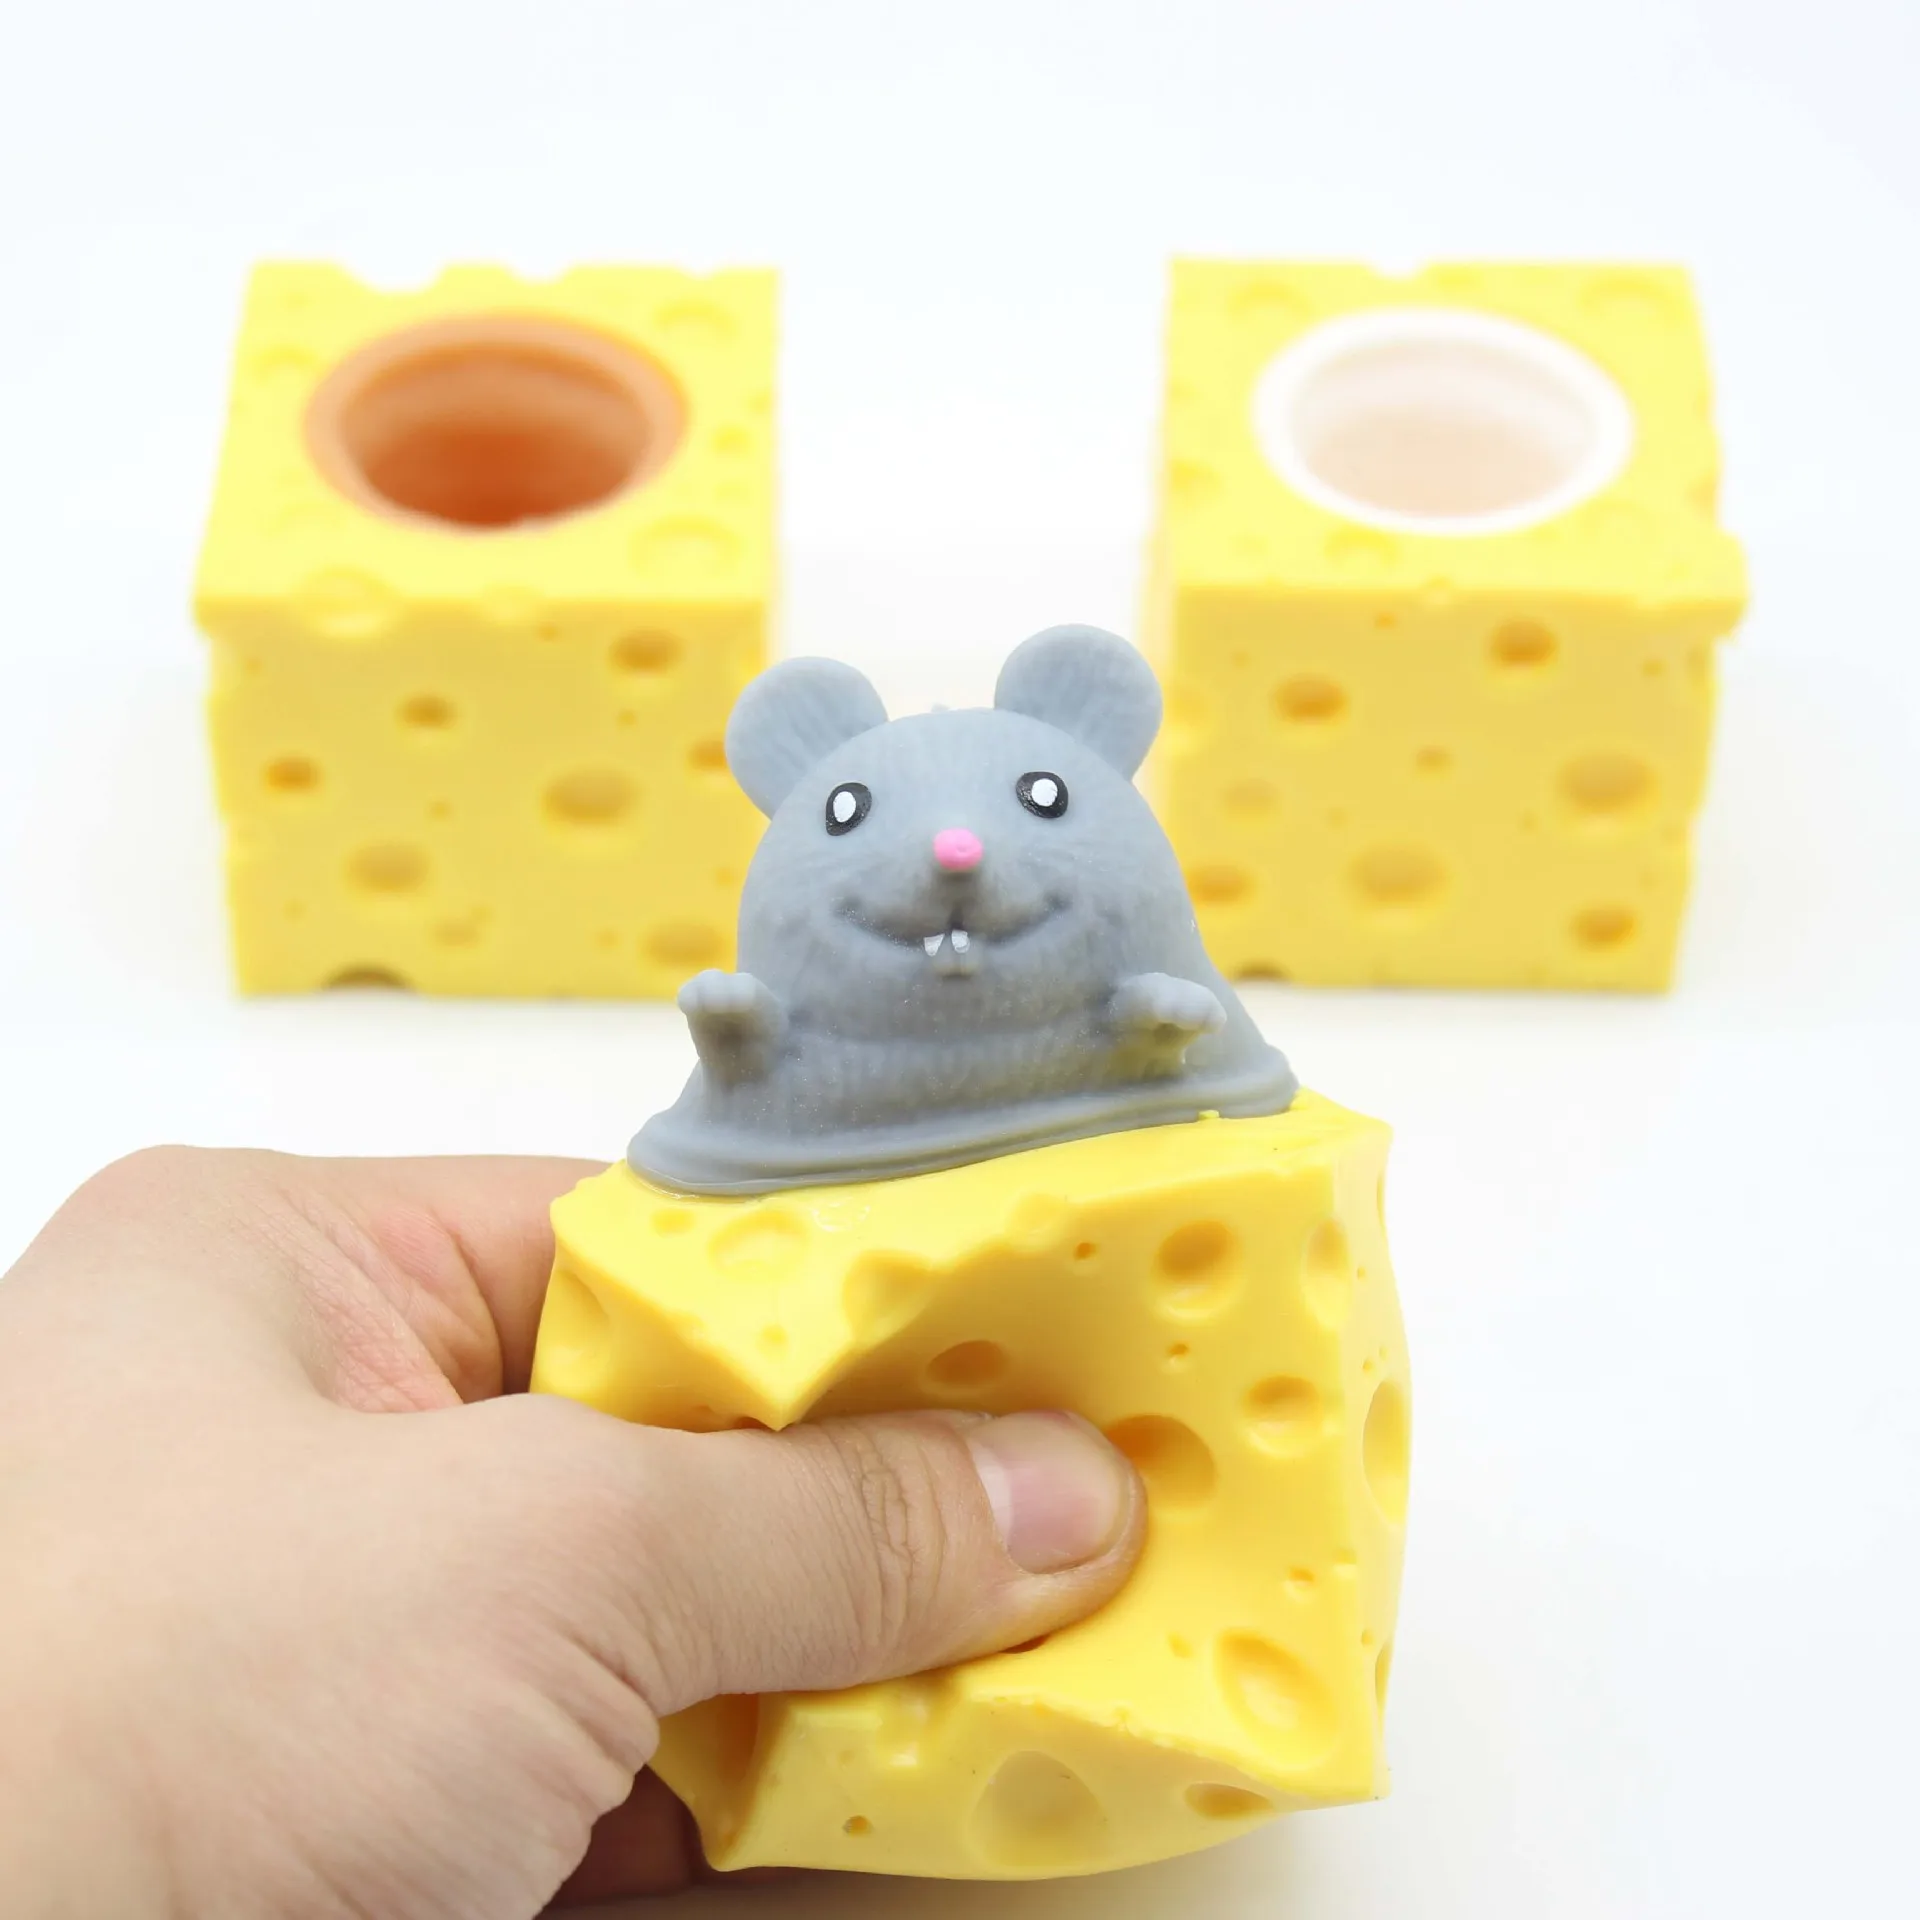 Fun pop up mouse cheese cup block squeeze anti-stress toy hide and seek and stress relief fingertip toy gift for kids adults